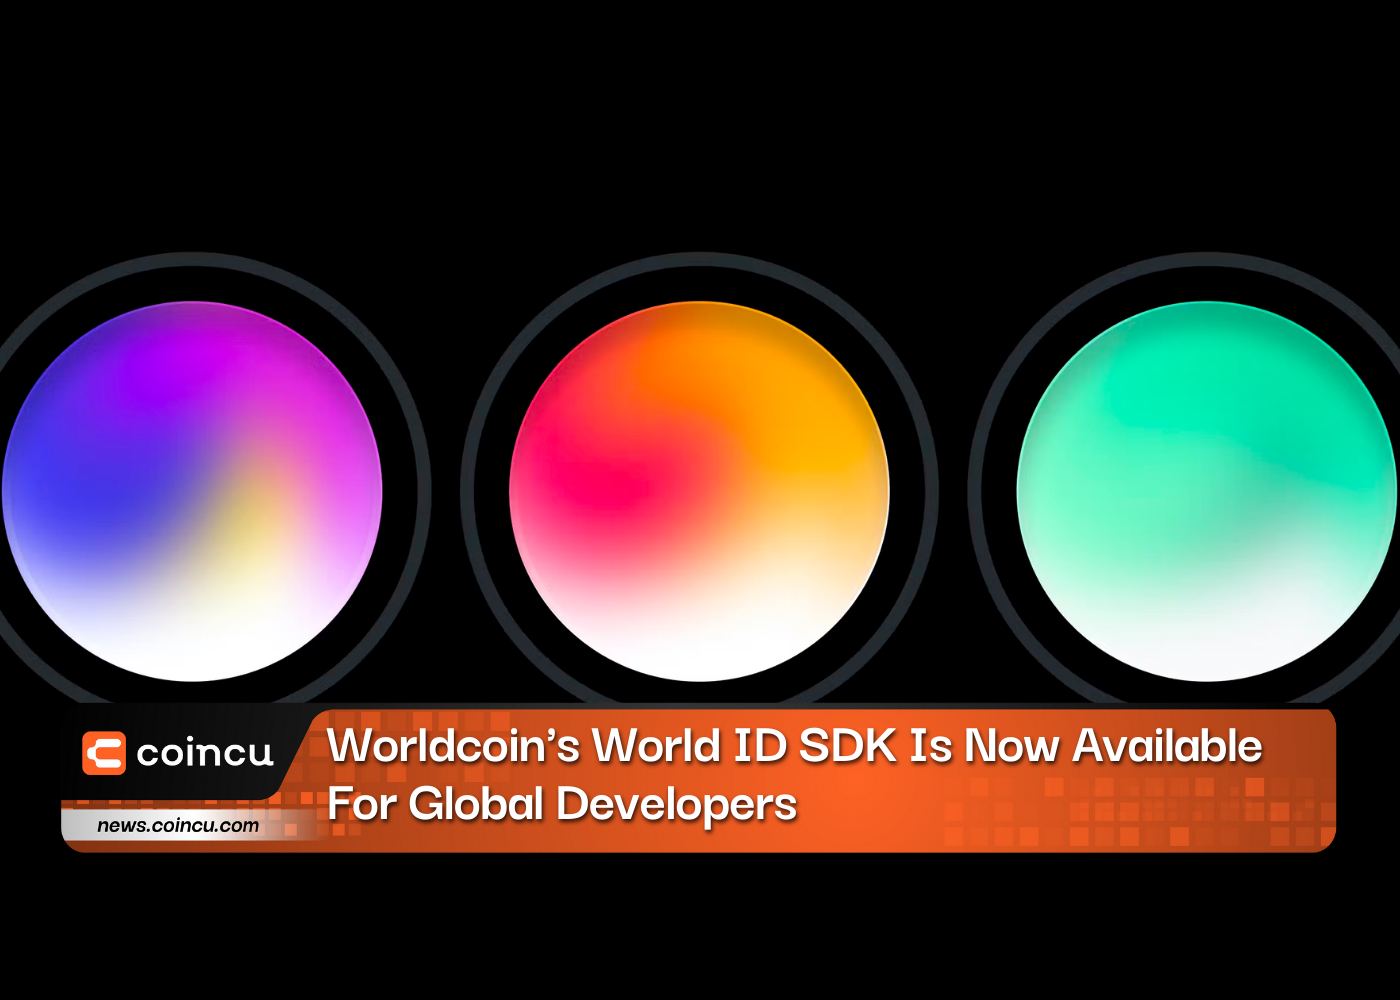 Worldcoin's World ID SDK Is Now Available For Global Developers